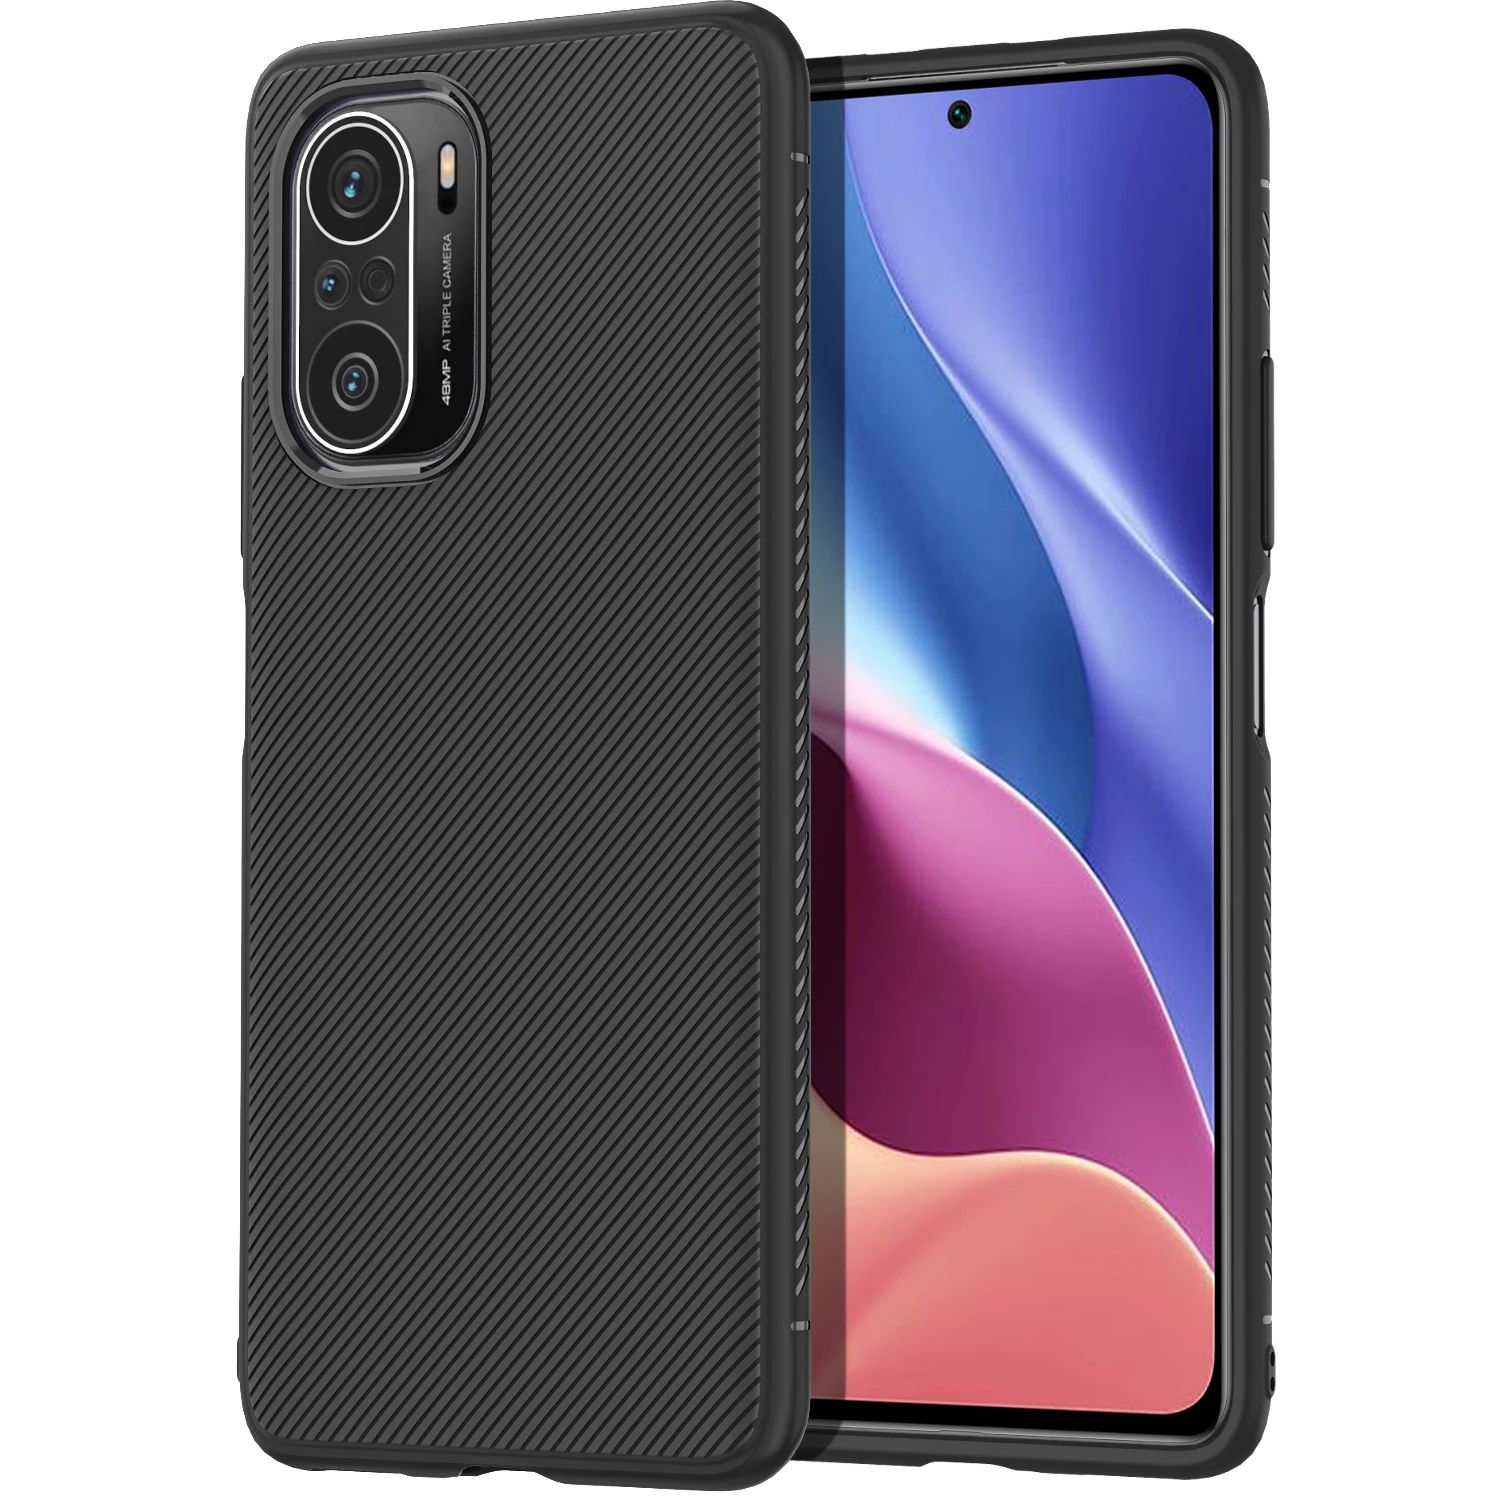 Bakeey for POCO F3 Global Version Case Carbon Fiber Texture Slim Soft Silicone Shockproof Protective Case Back Cover